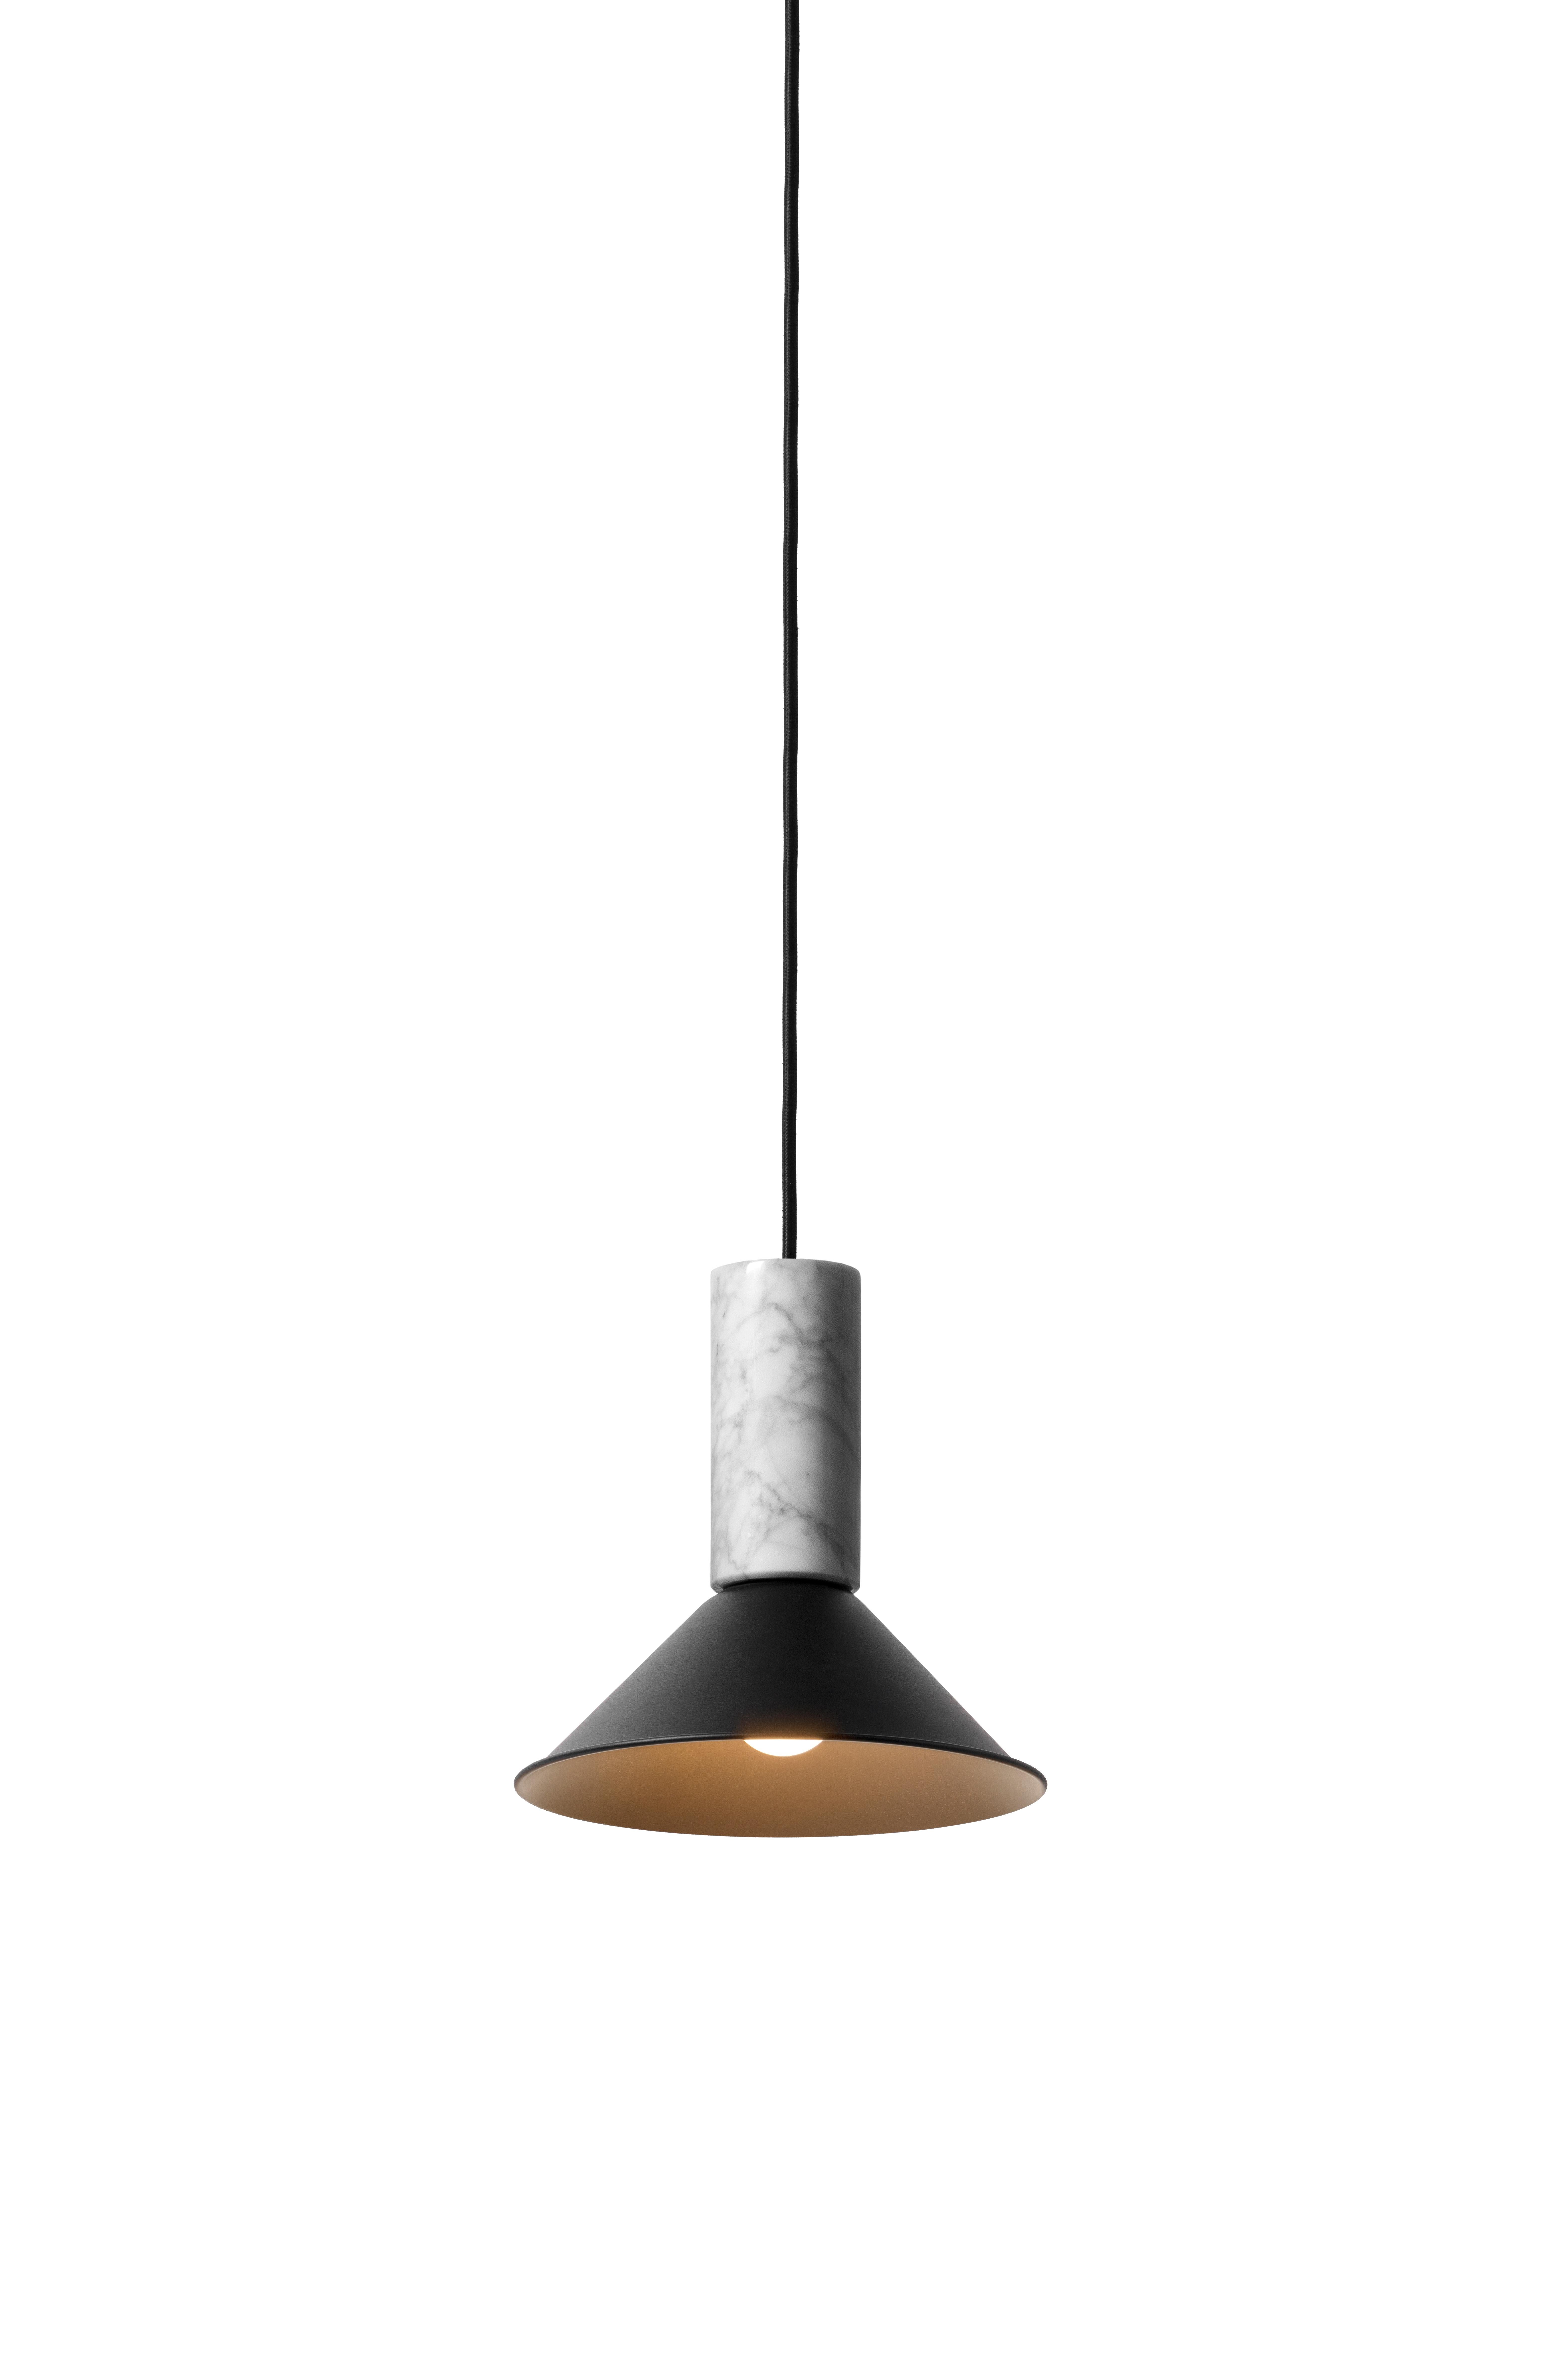 Pendant lamp 'R' by Buzao x Bentu design.
White marble and black aluminum

Measures: 21 cm high, 21 cm diameter
Wire: 2 meters black (adjustable)
Lamp type: E27 LED 3W 100-240V 80Ra 200LM 2700K - Comptable with US electric system.
Ceiling rose: